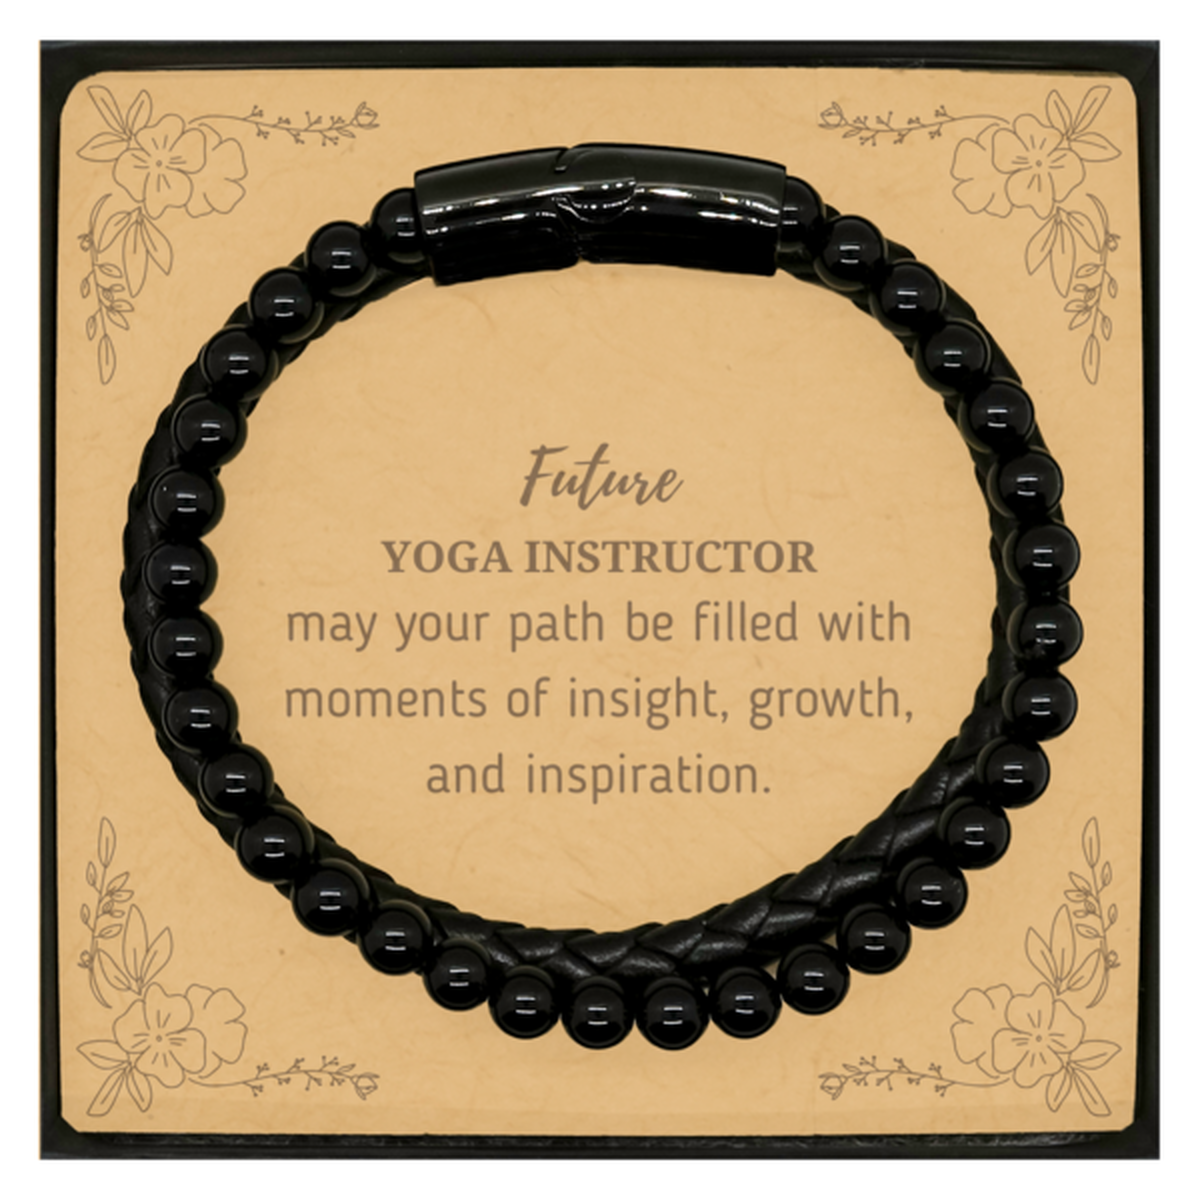 Future Yoga Instructor Gifts, May your path be filled with moments of insight, Graduation Gifts for New Yoga Instructor, Christmas Unique Stone Leather Bracelets For Men, Women, Friends